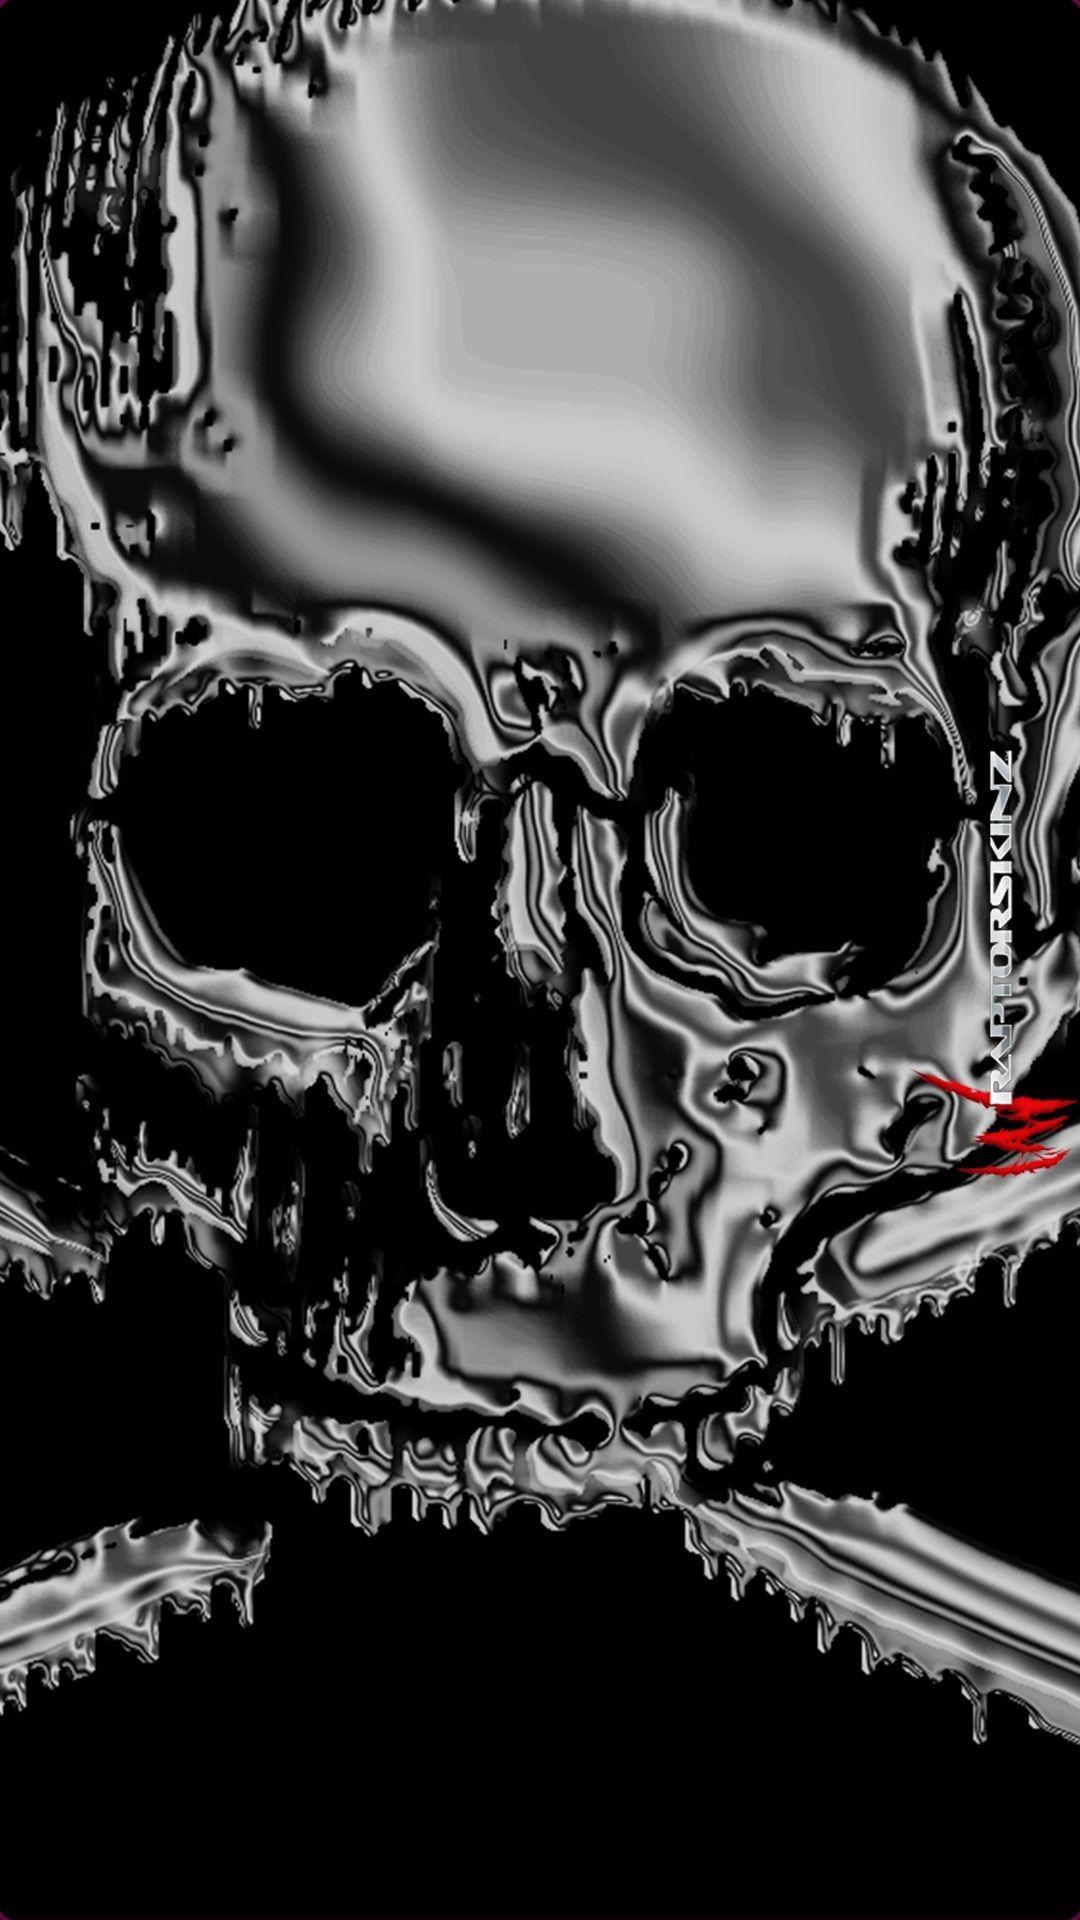 Download Skull Wallpaper For Samsung Galaxy S5 Size 1080 x 1920